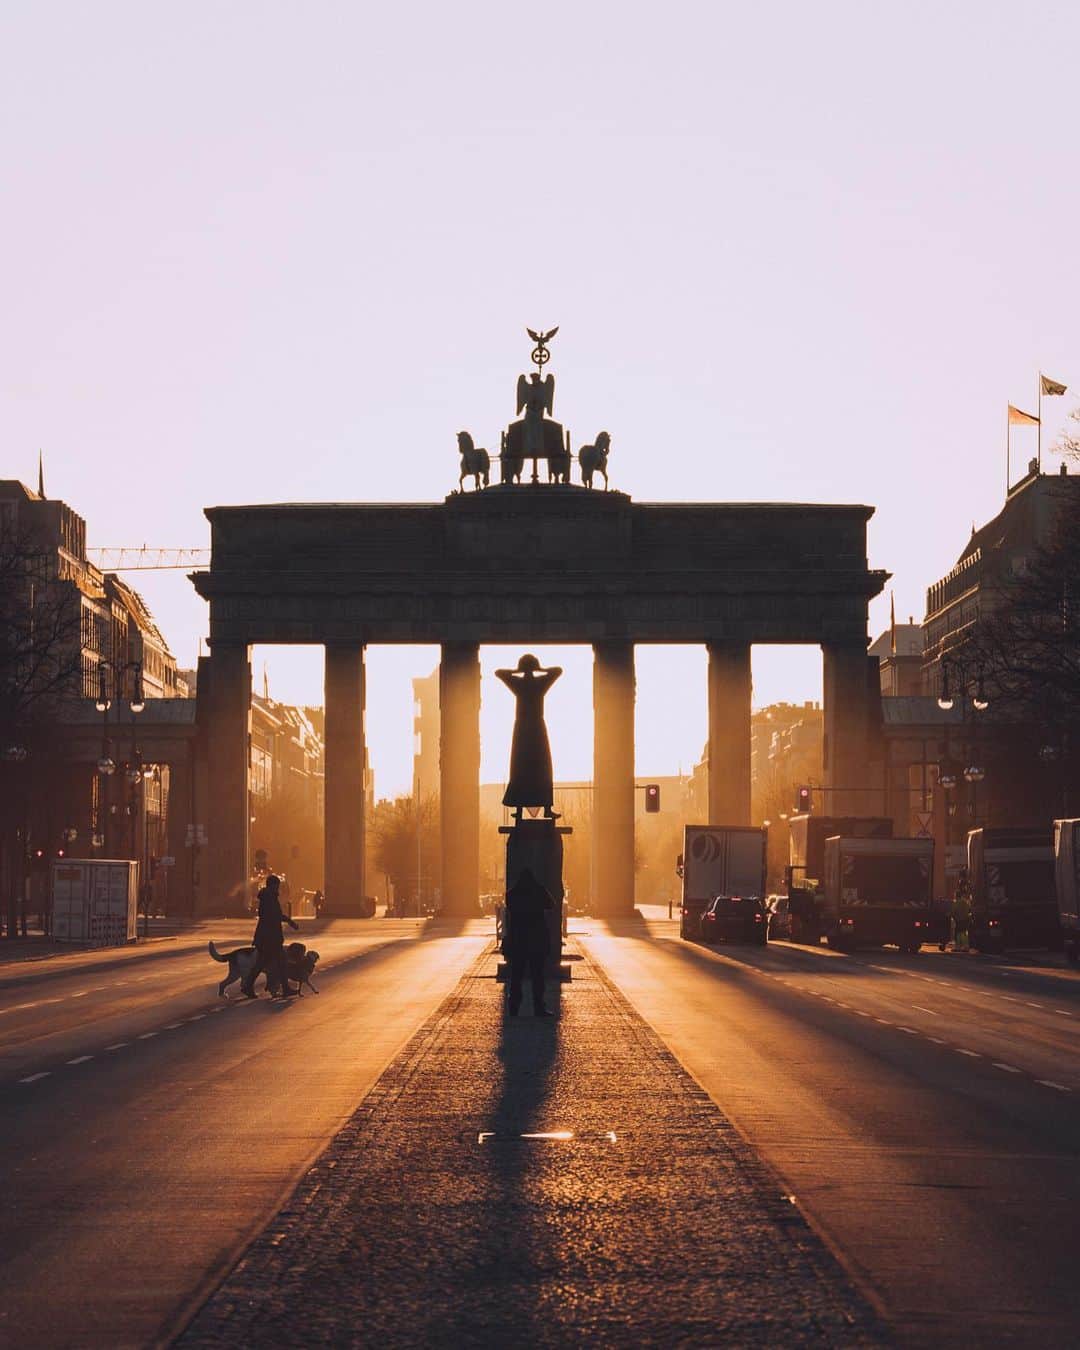 Thomas Kakarekoのインスタグラム：「Contrasting atmospheres at Berlin's Brandenburger Tor: The golden hour sunrise versus a misty morning. Swipe to explore these distinct moods and let me know your favorite in the comments.  #berlin」